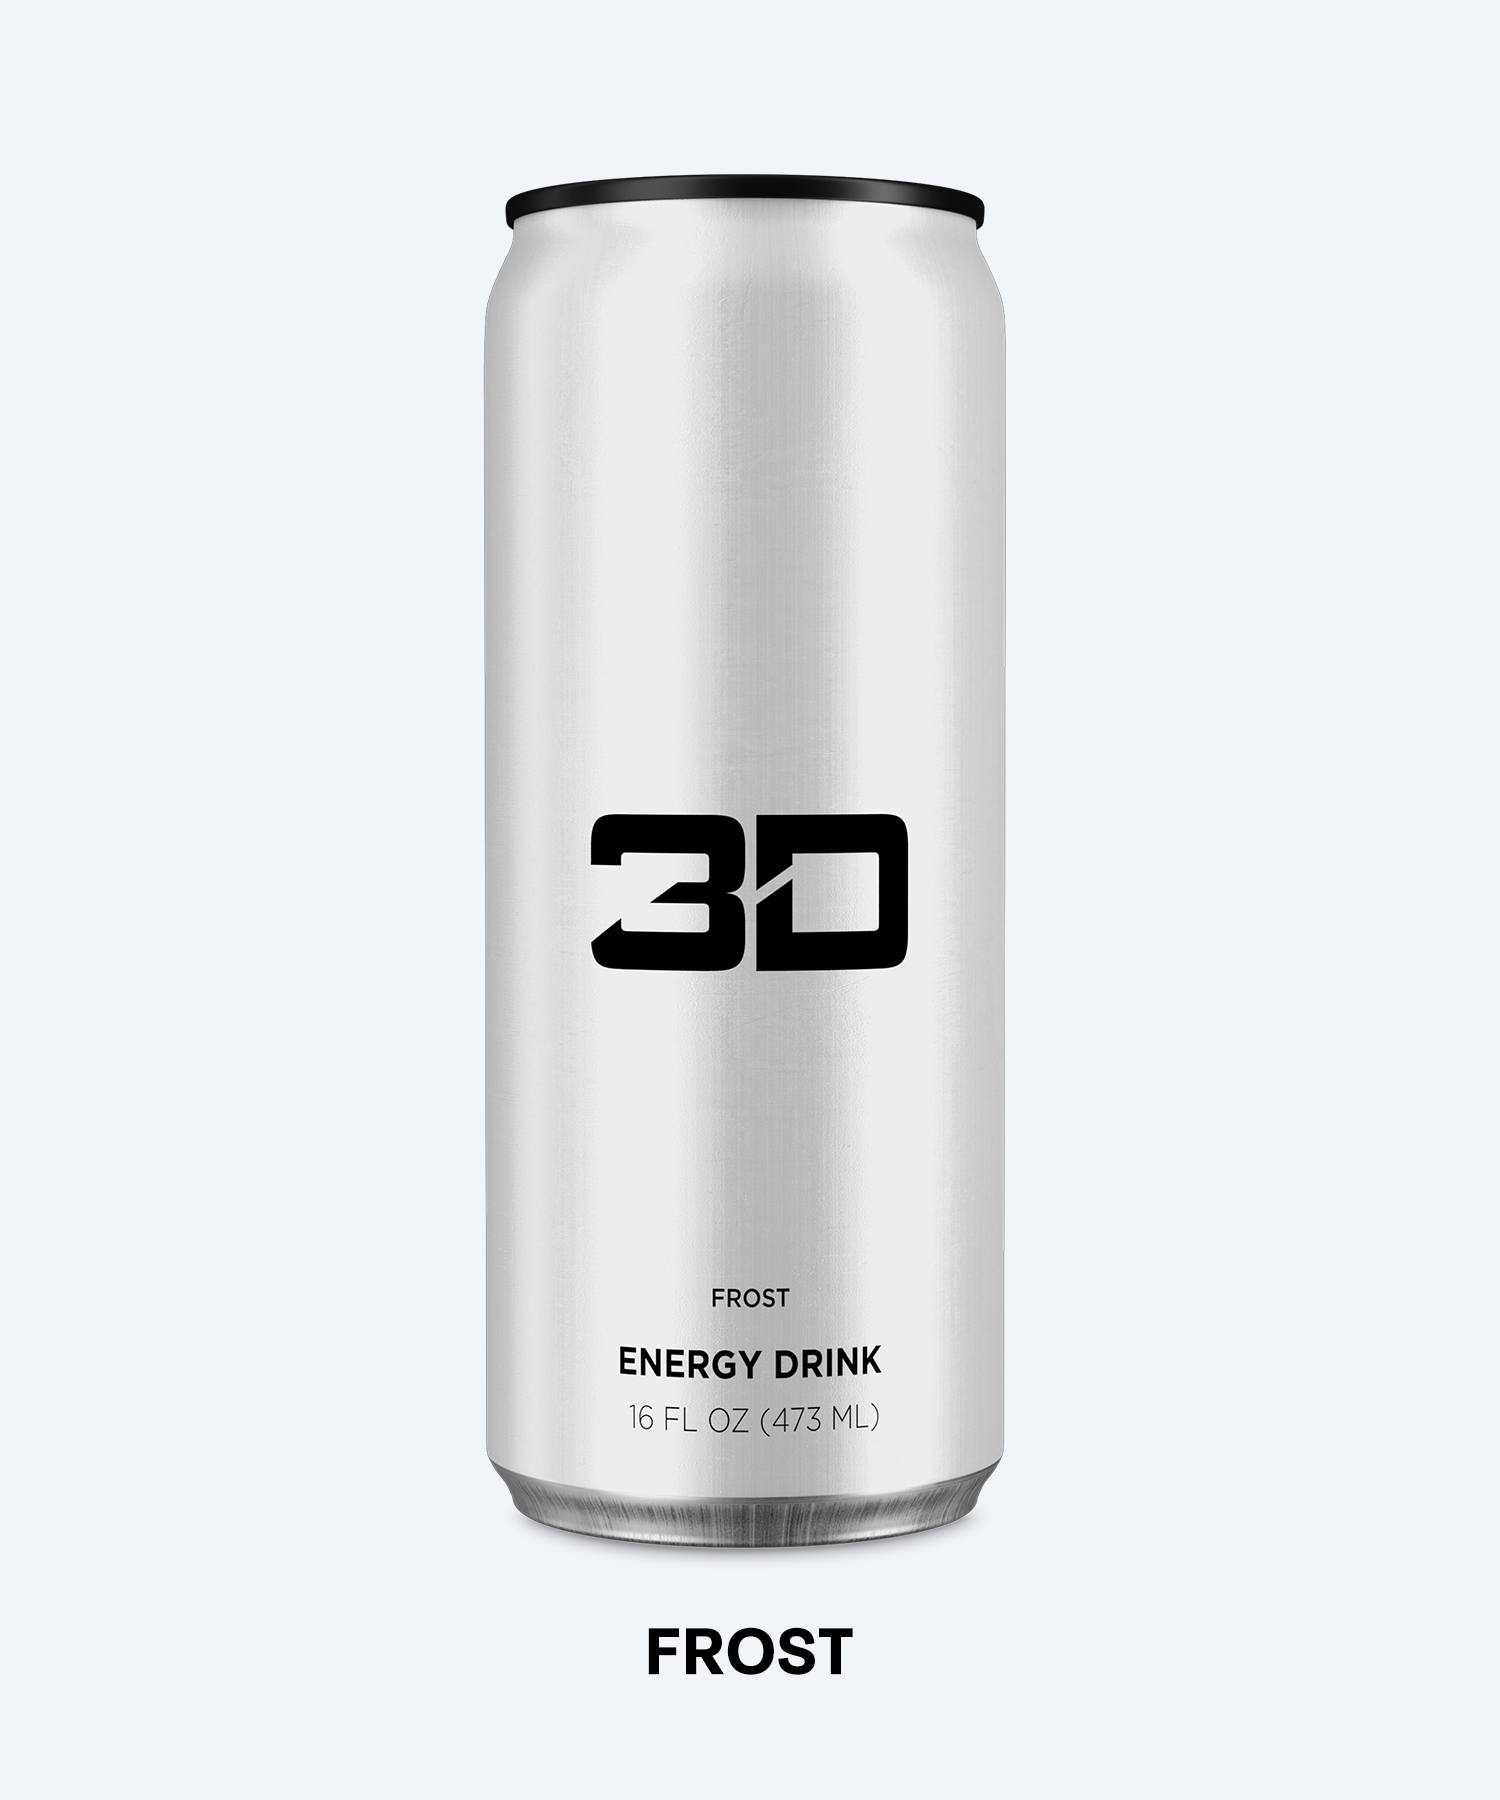 A 3D energy drink in flavor frost.